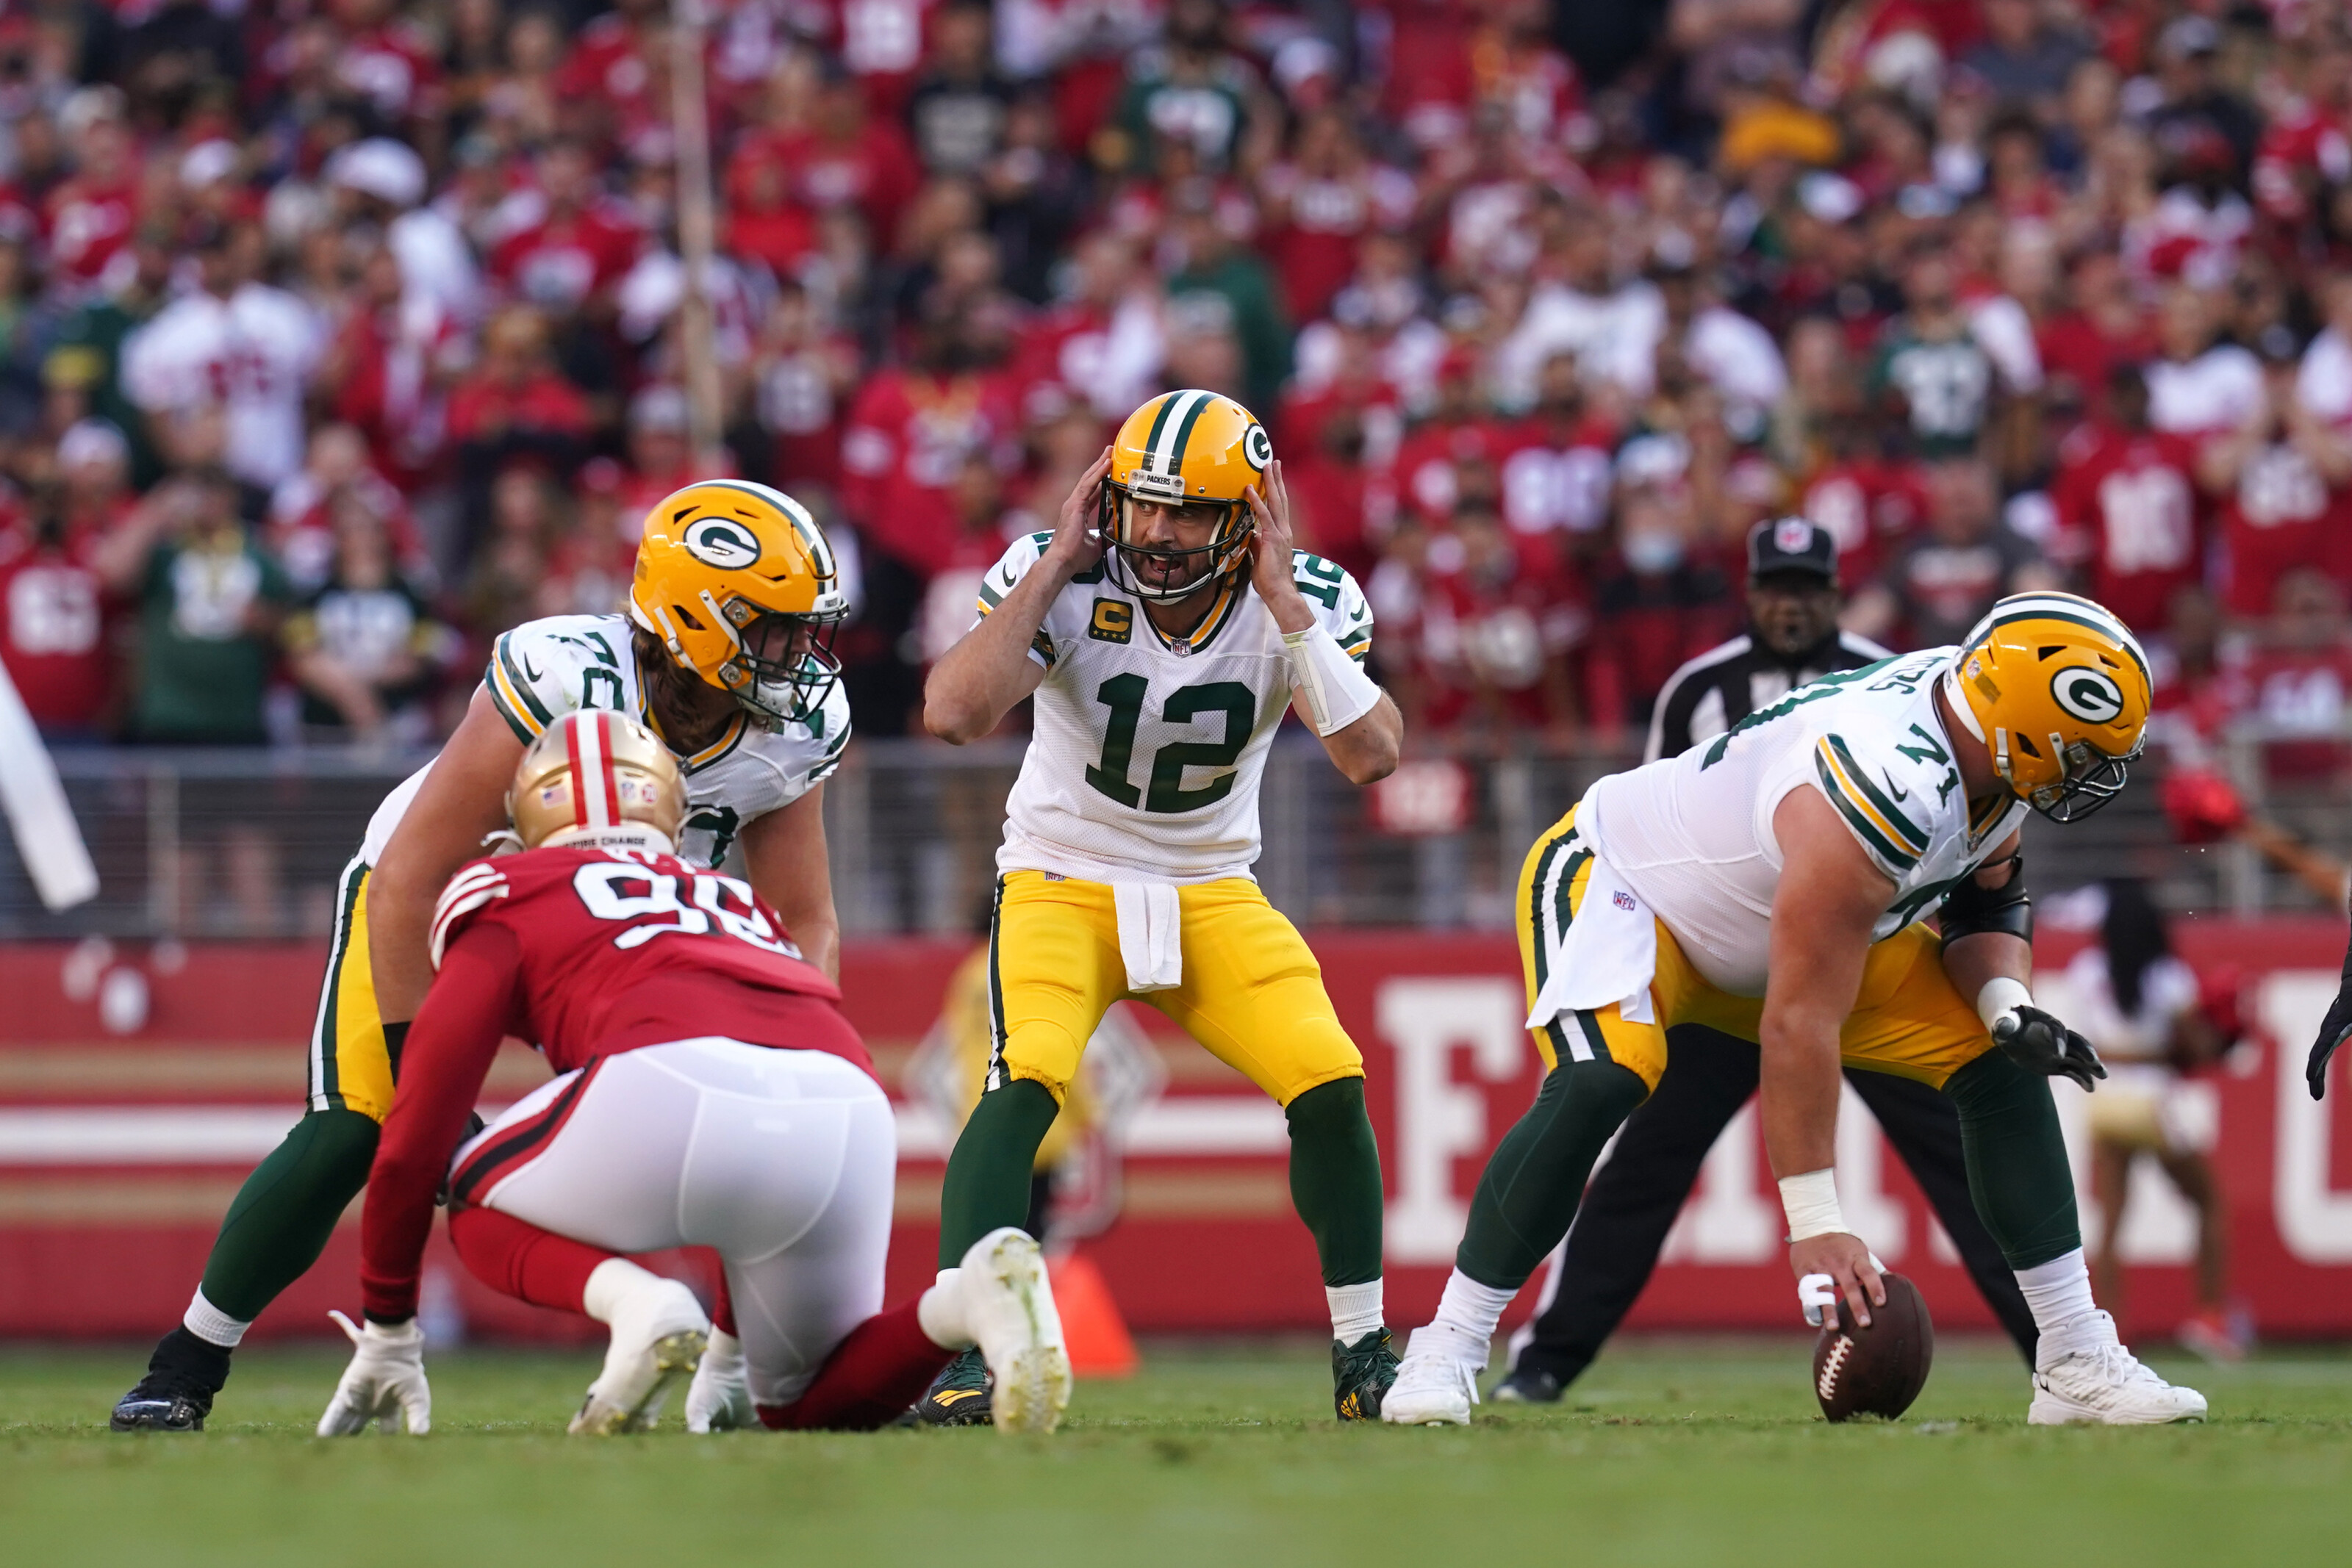 packers versus the 49ers